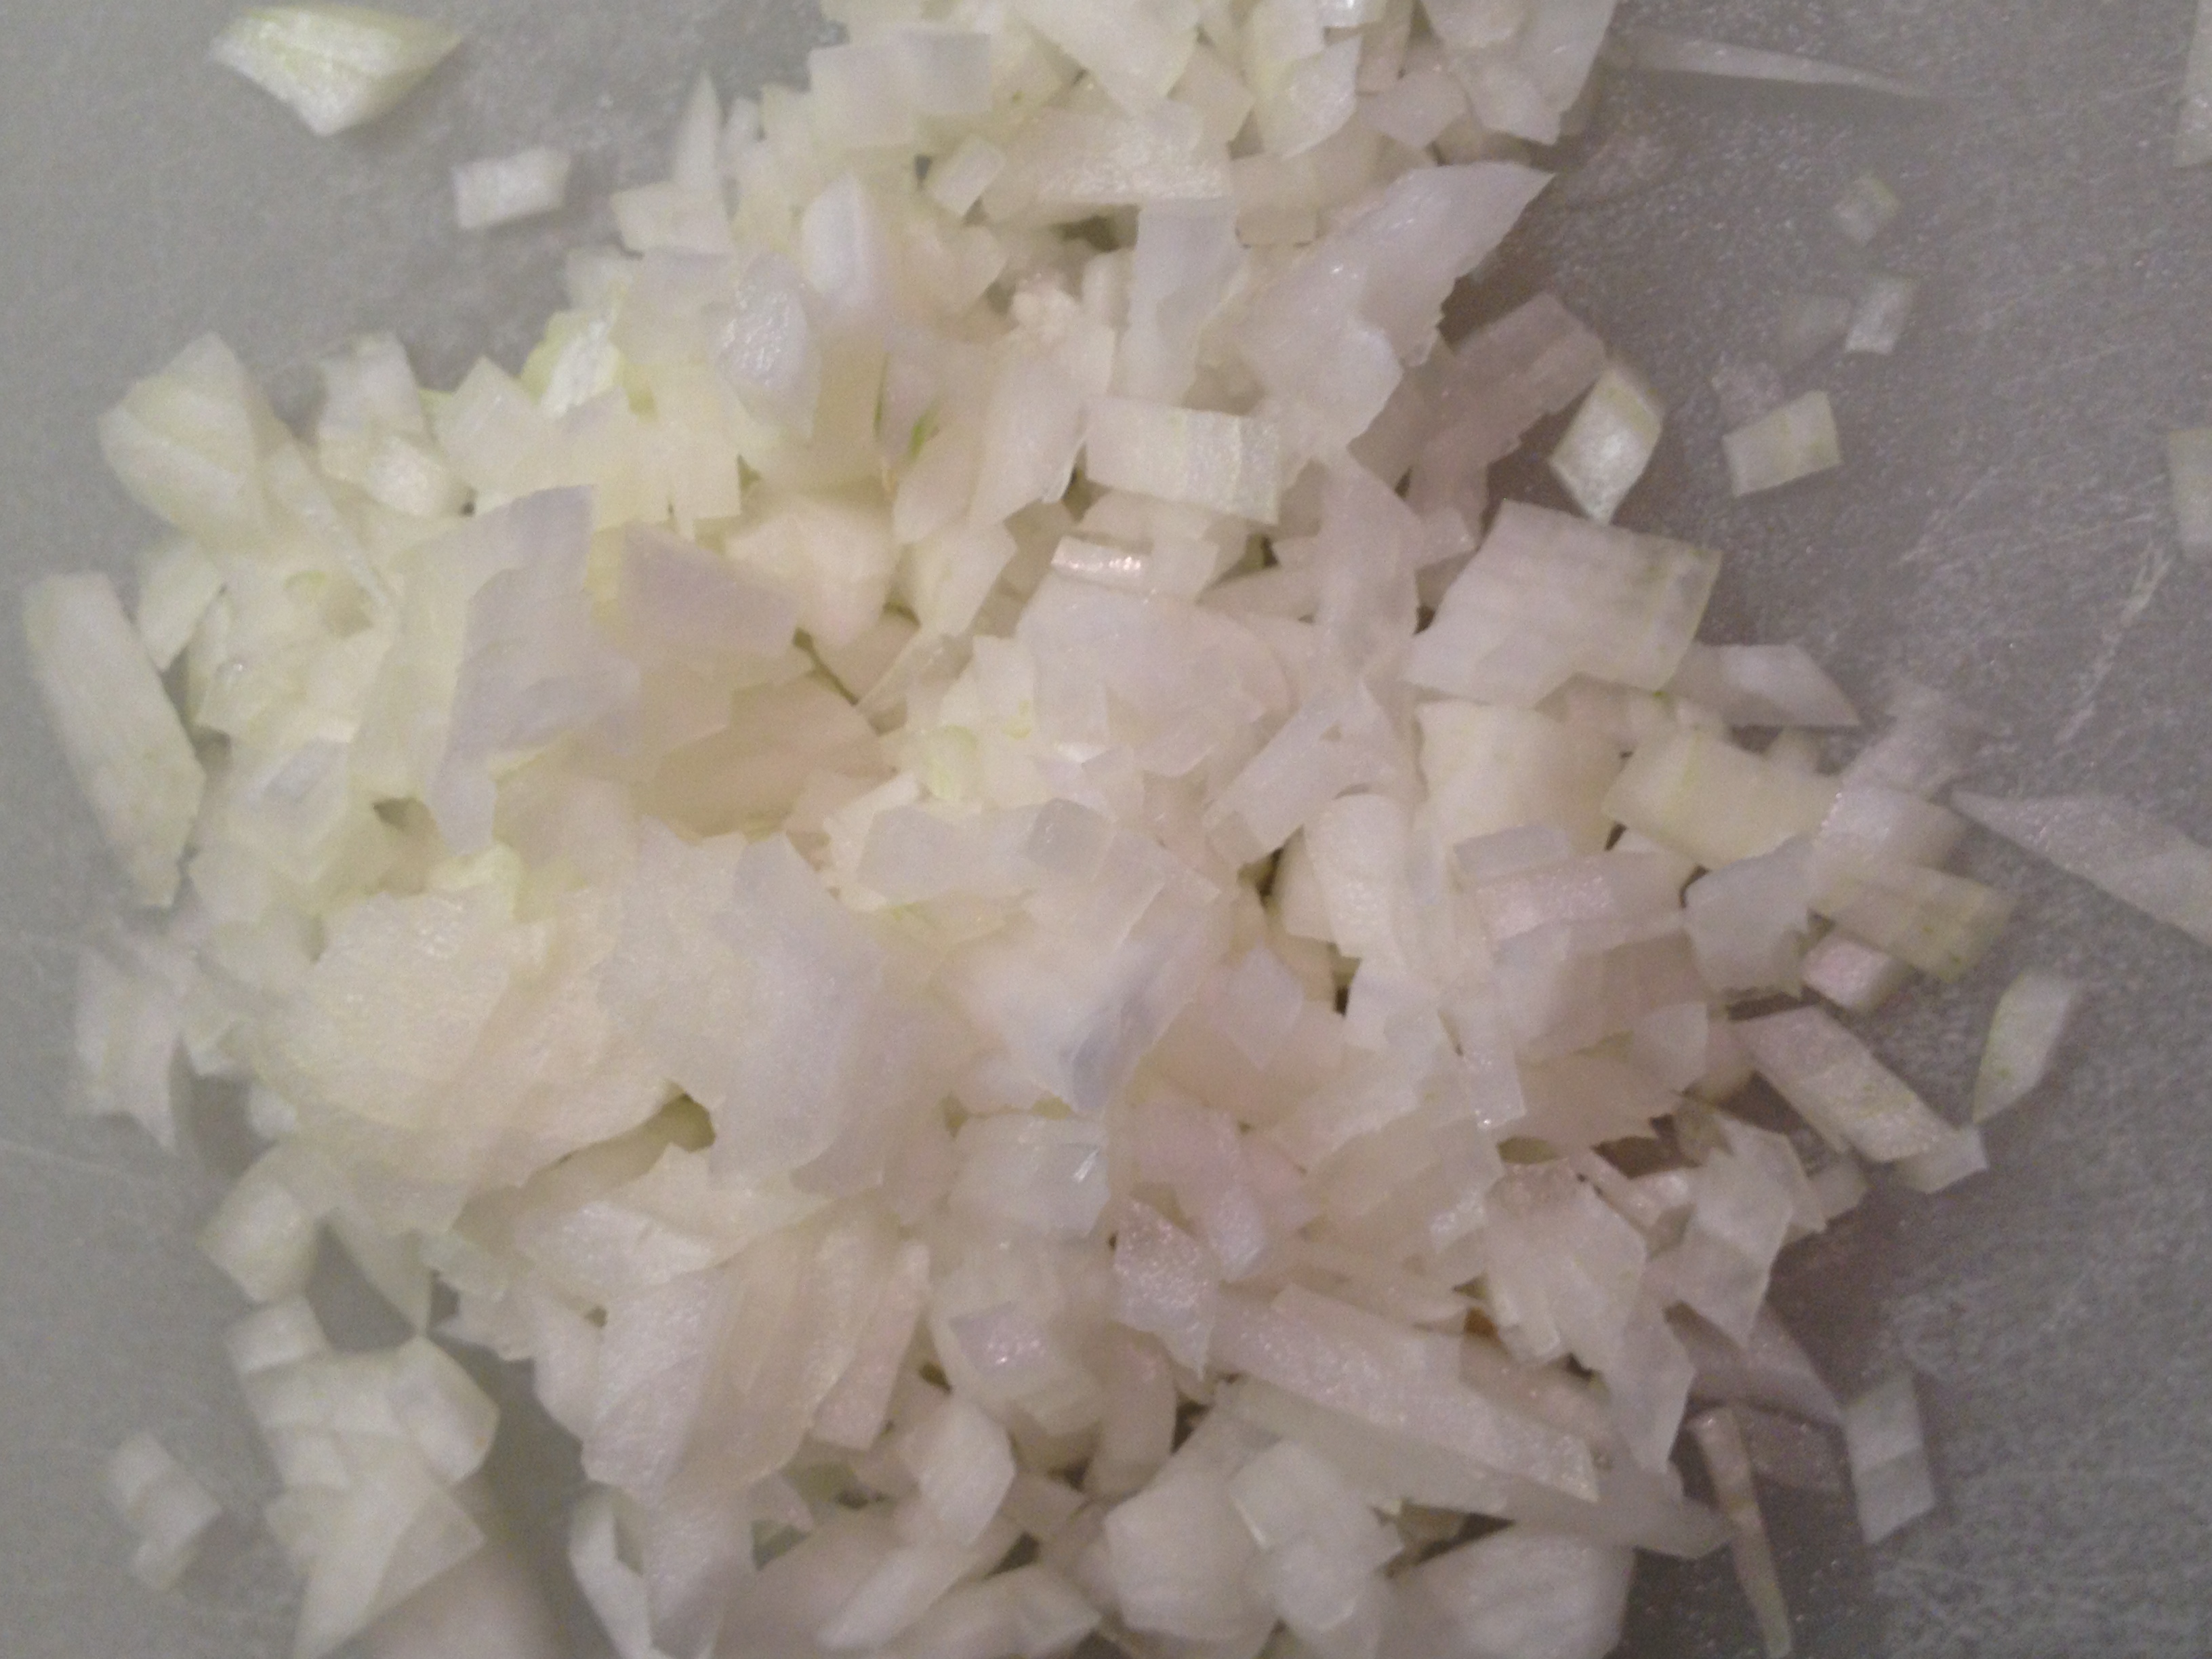 Picture of our chopped onion.   Tidbit Tip:  If a recipe calls for 1 cup of chopped onions you would chop the onion and then measure a cup.  If the recipe calls for one onion chopped you would chop the onion and use the entire onion.  The recipe will usually say what size onion to use like small, medium or large.   